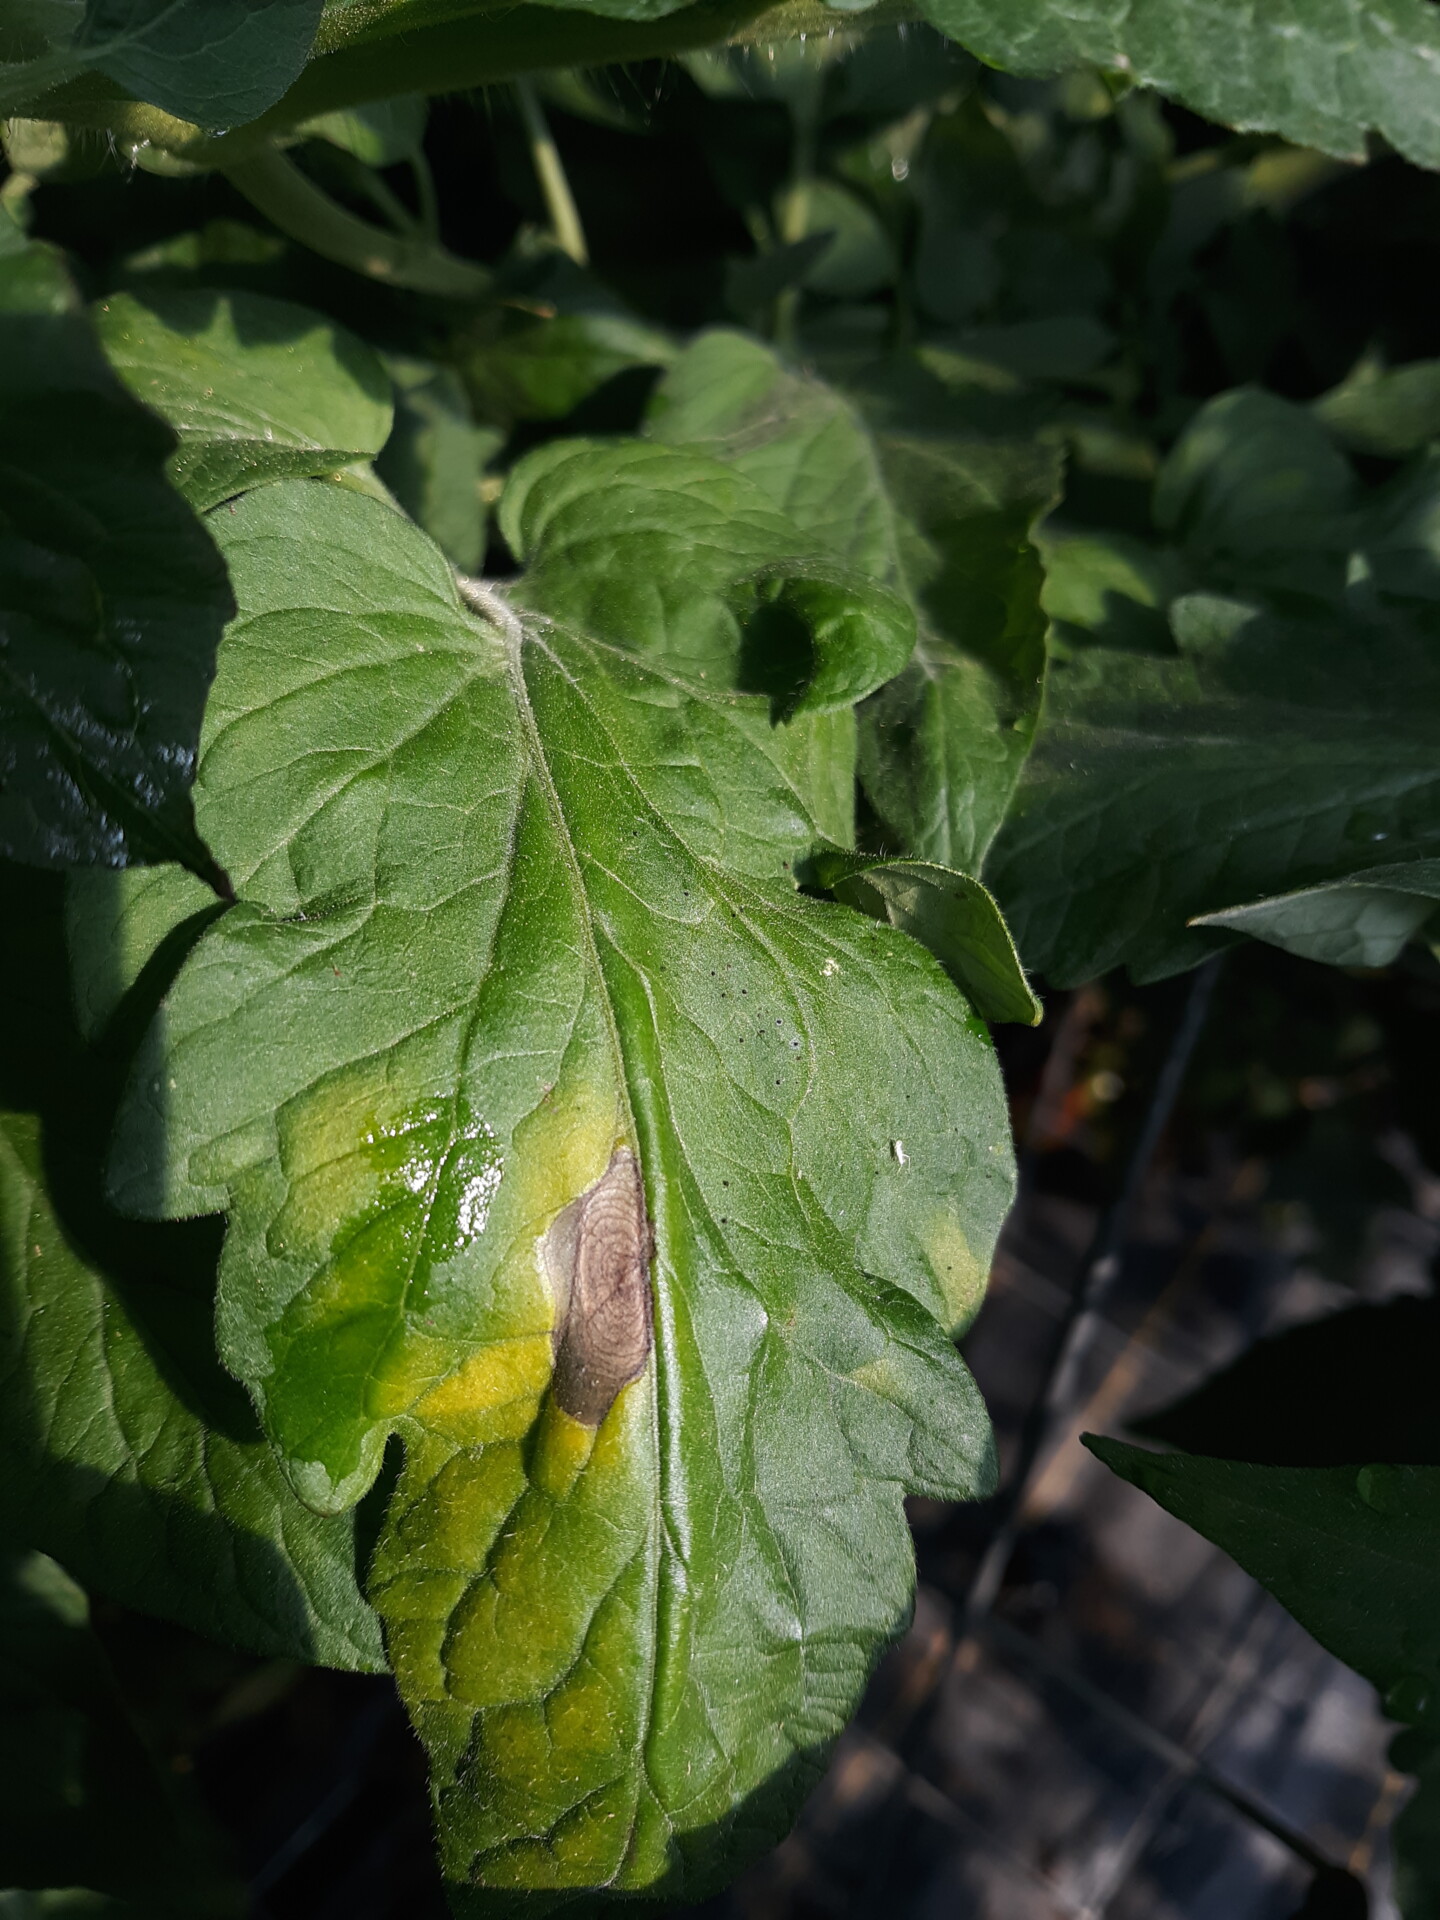 Early blight lesion on tomato leaf.